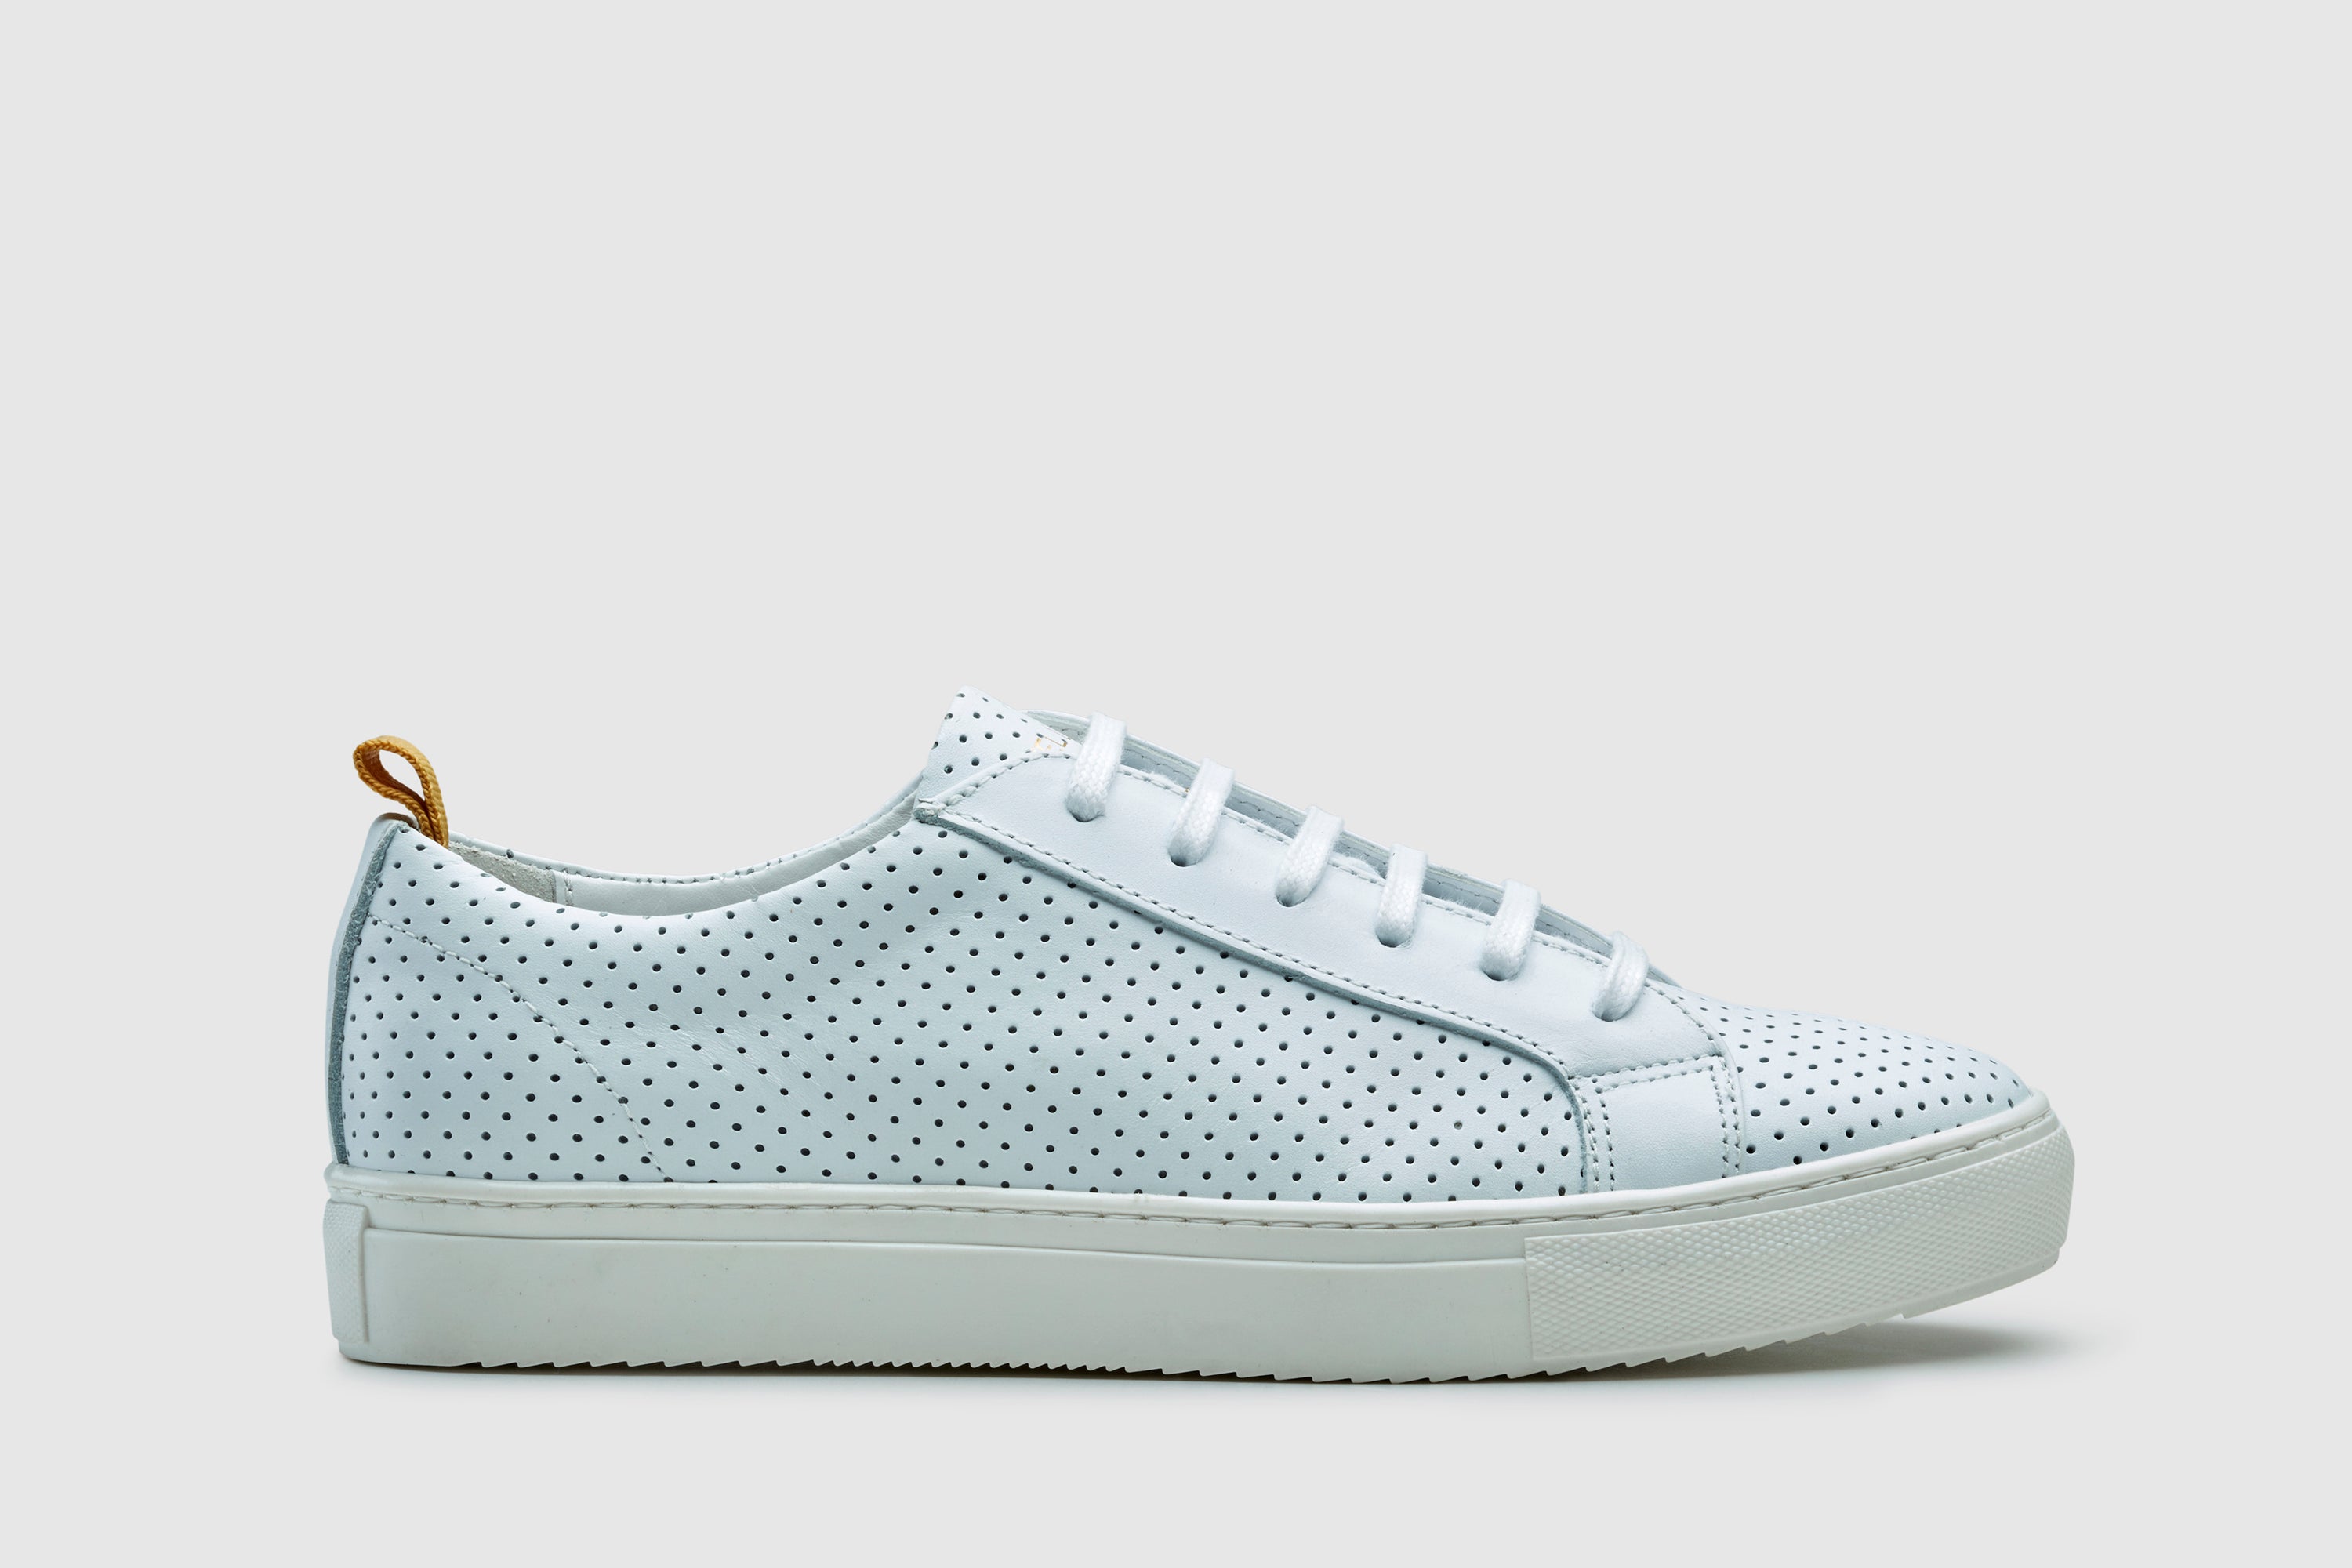 Arena Lite - White Perforated Leather